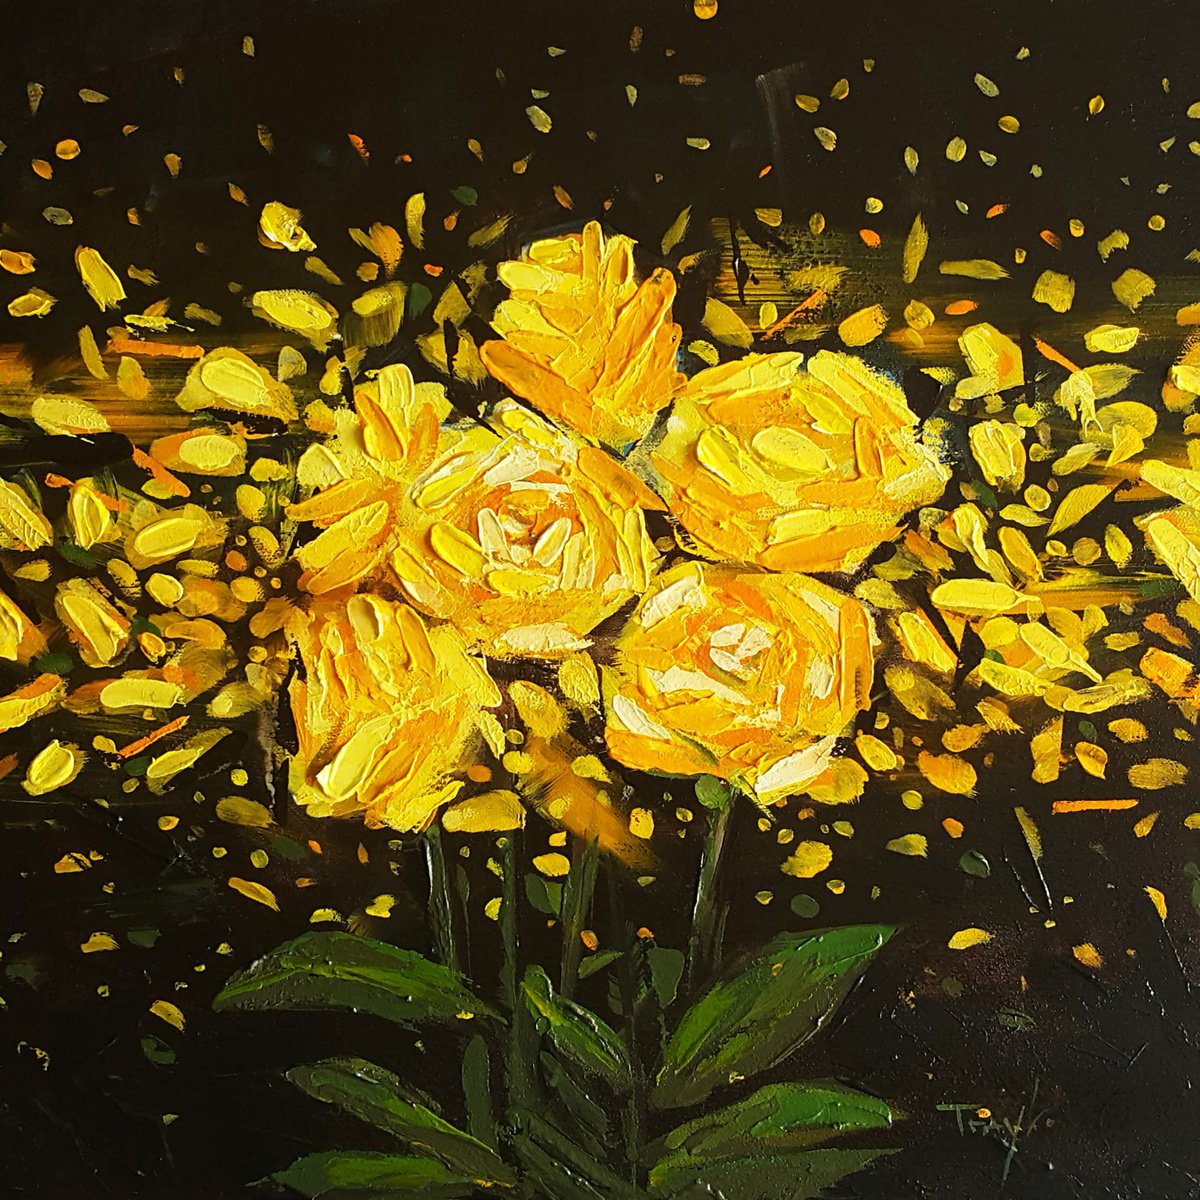 Flowers | Yellow Roses by Trayko Popov